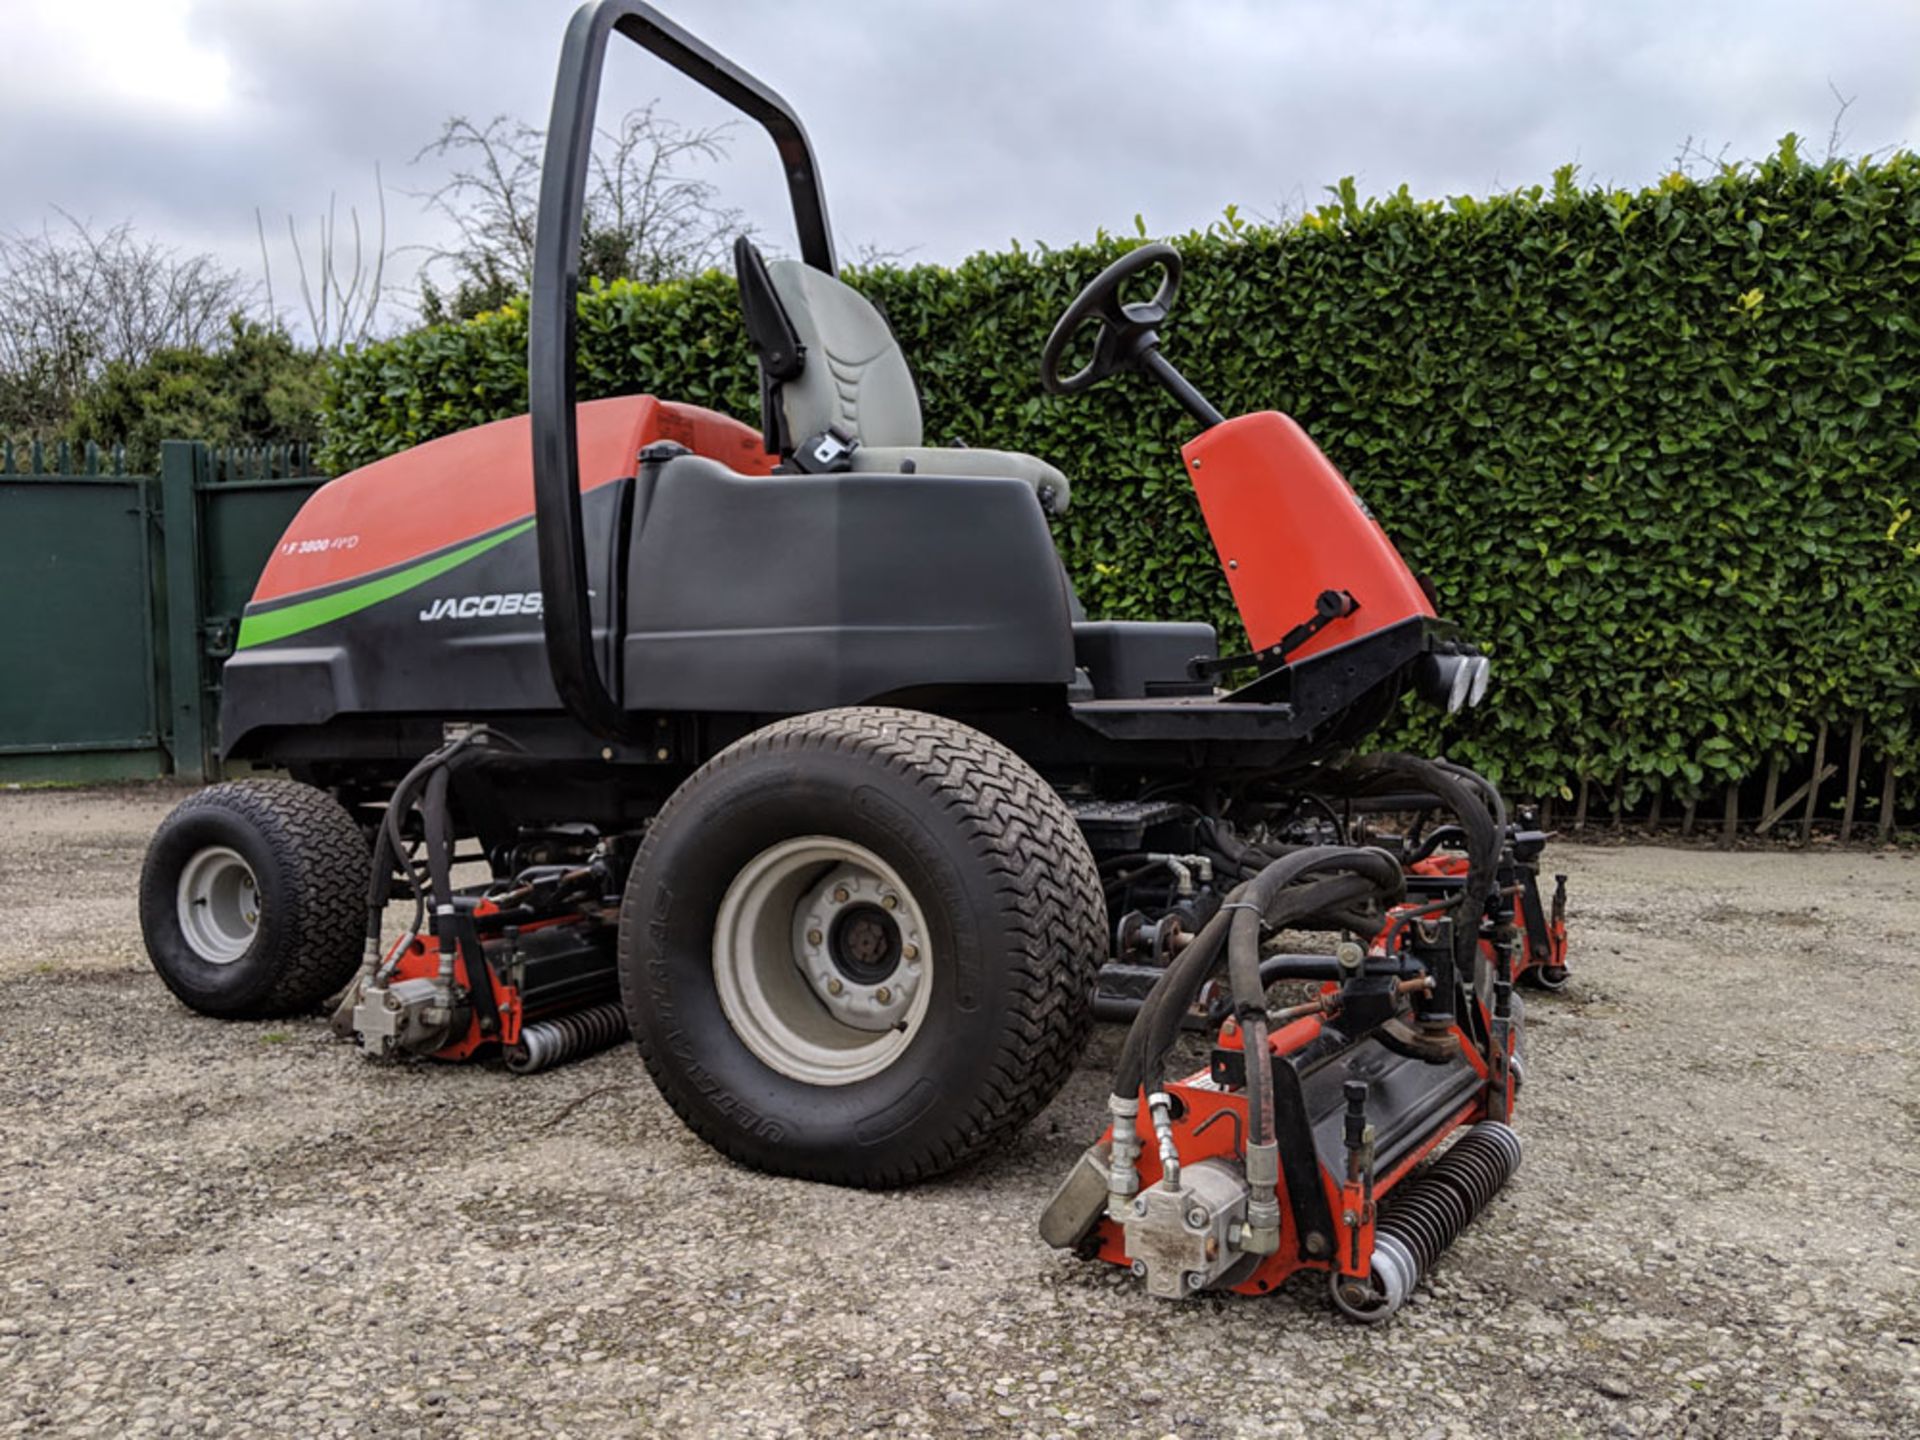 2007 Ransomes Jacobsen LF3800 4WD Cylinder Mower - Image 8 of 9